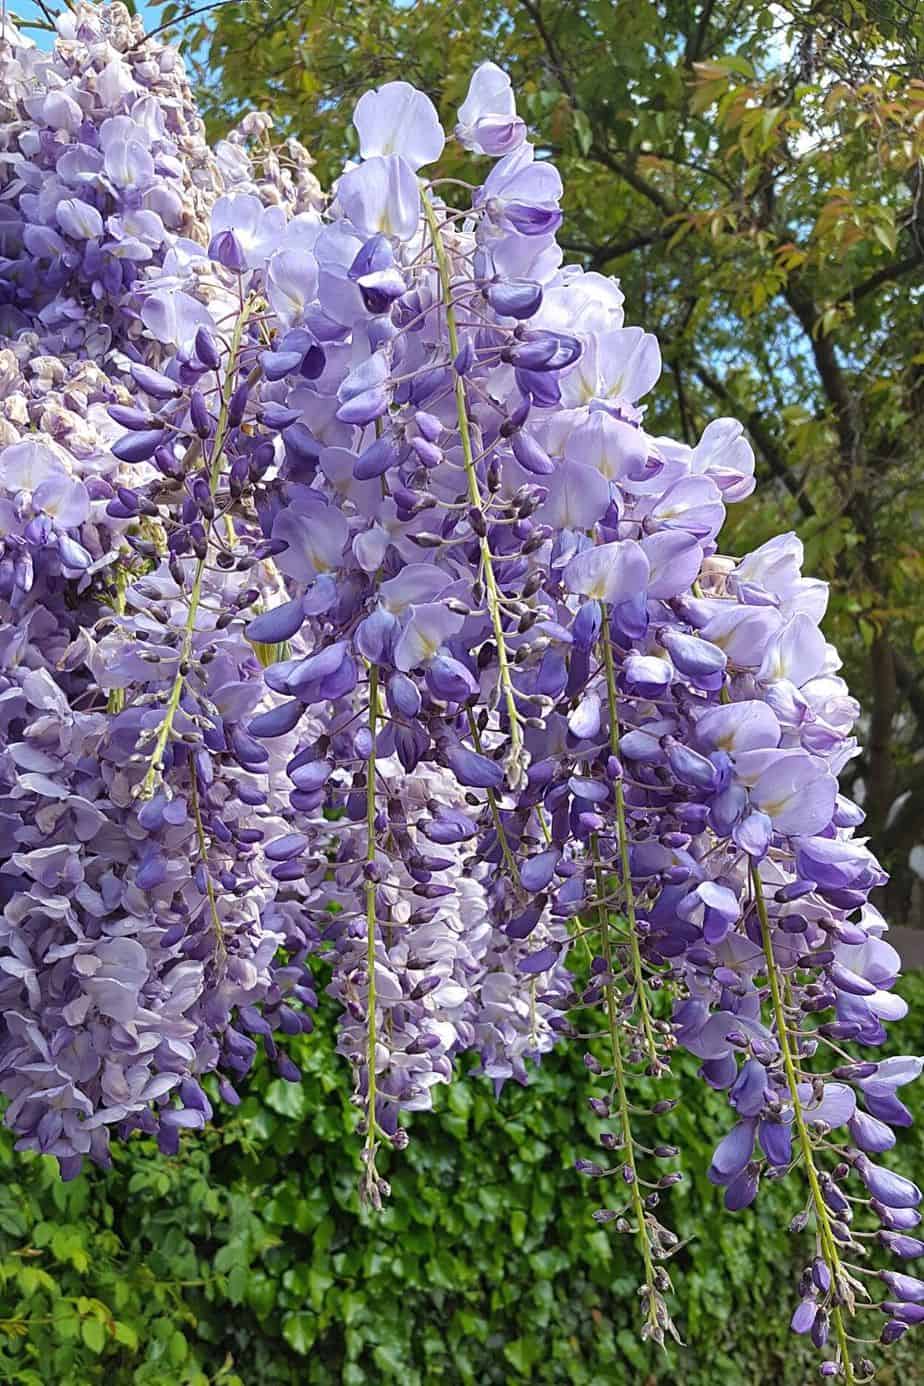 If you're looking for a mystical-looking plant to add to your southeast facing garden, then Chinese Wisteria is your plant of choice